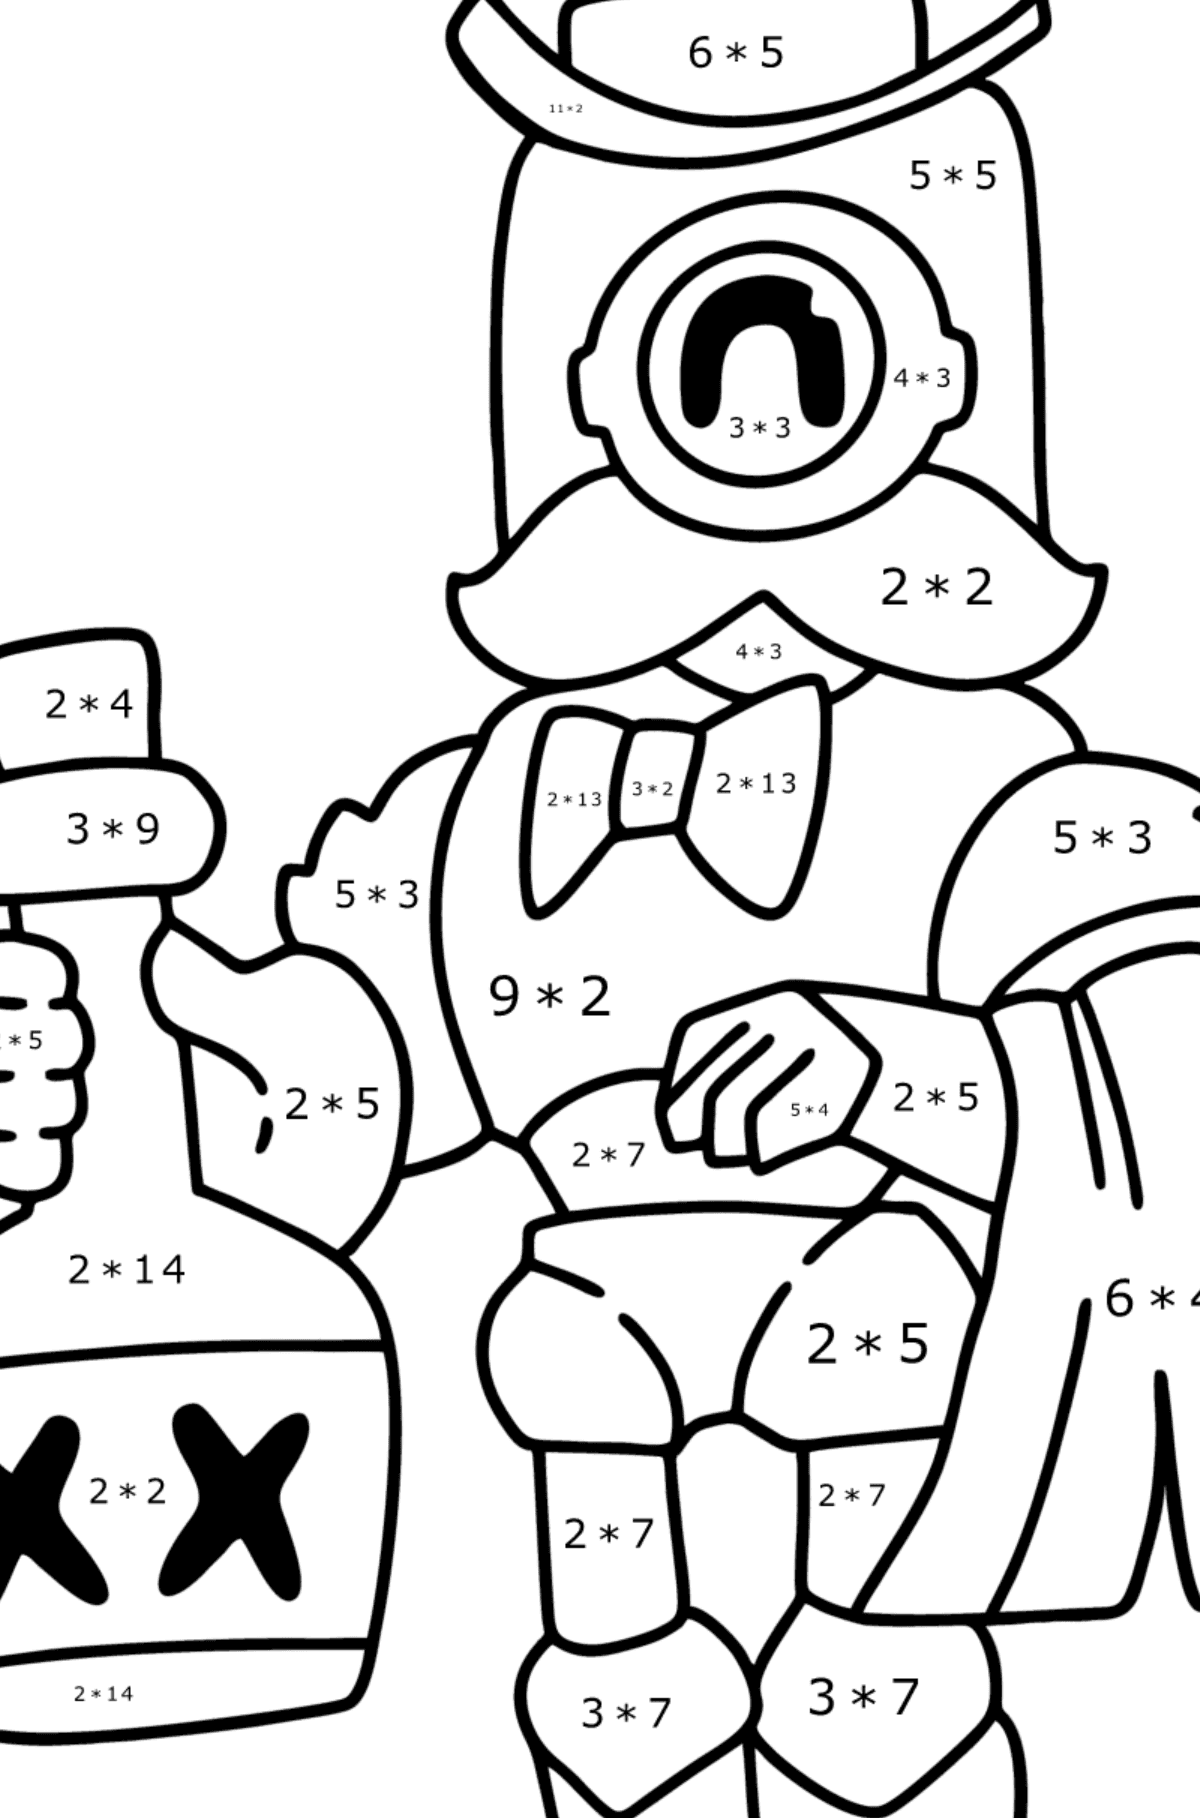 Brawl Stars Barley colouring page - Math Coloring - Multiplication for Kids